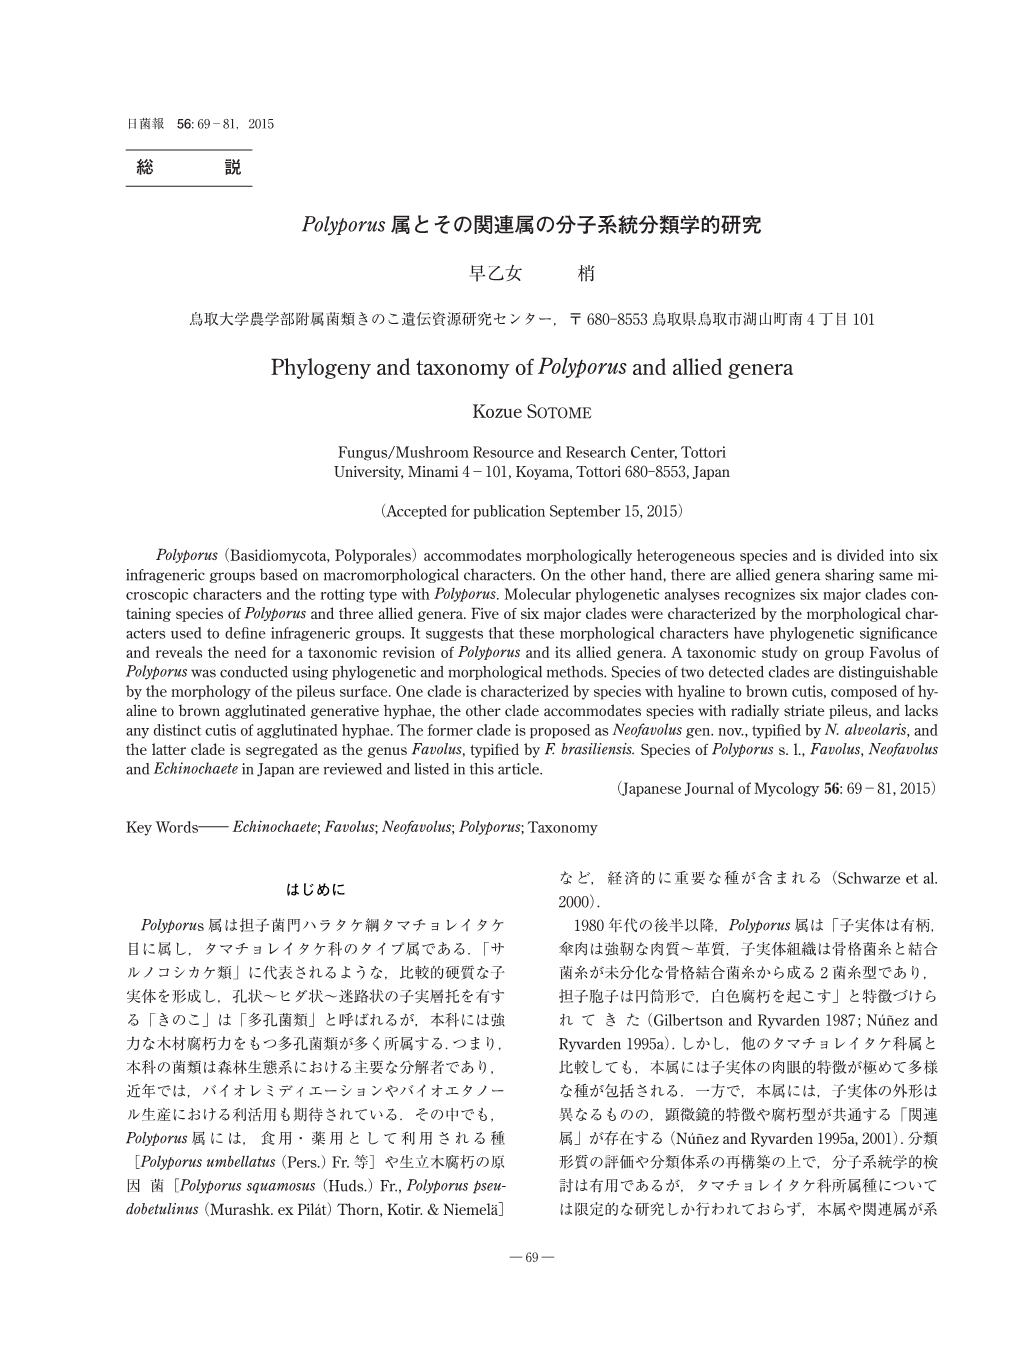 Phylogeny and Taxonomy of Polyporus and Allied Genera